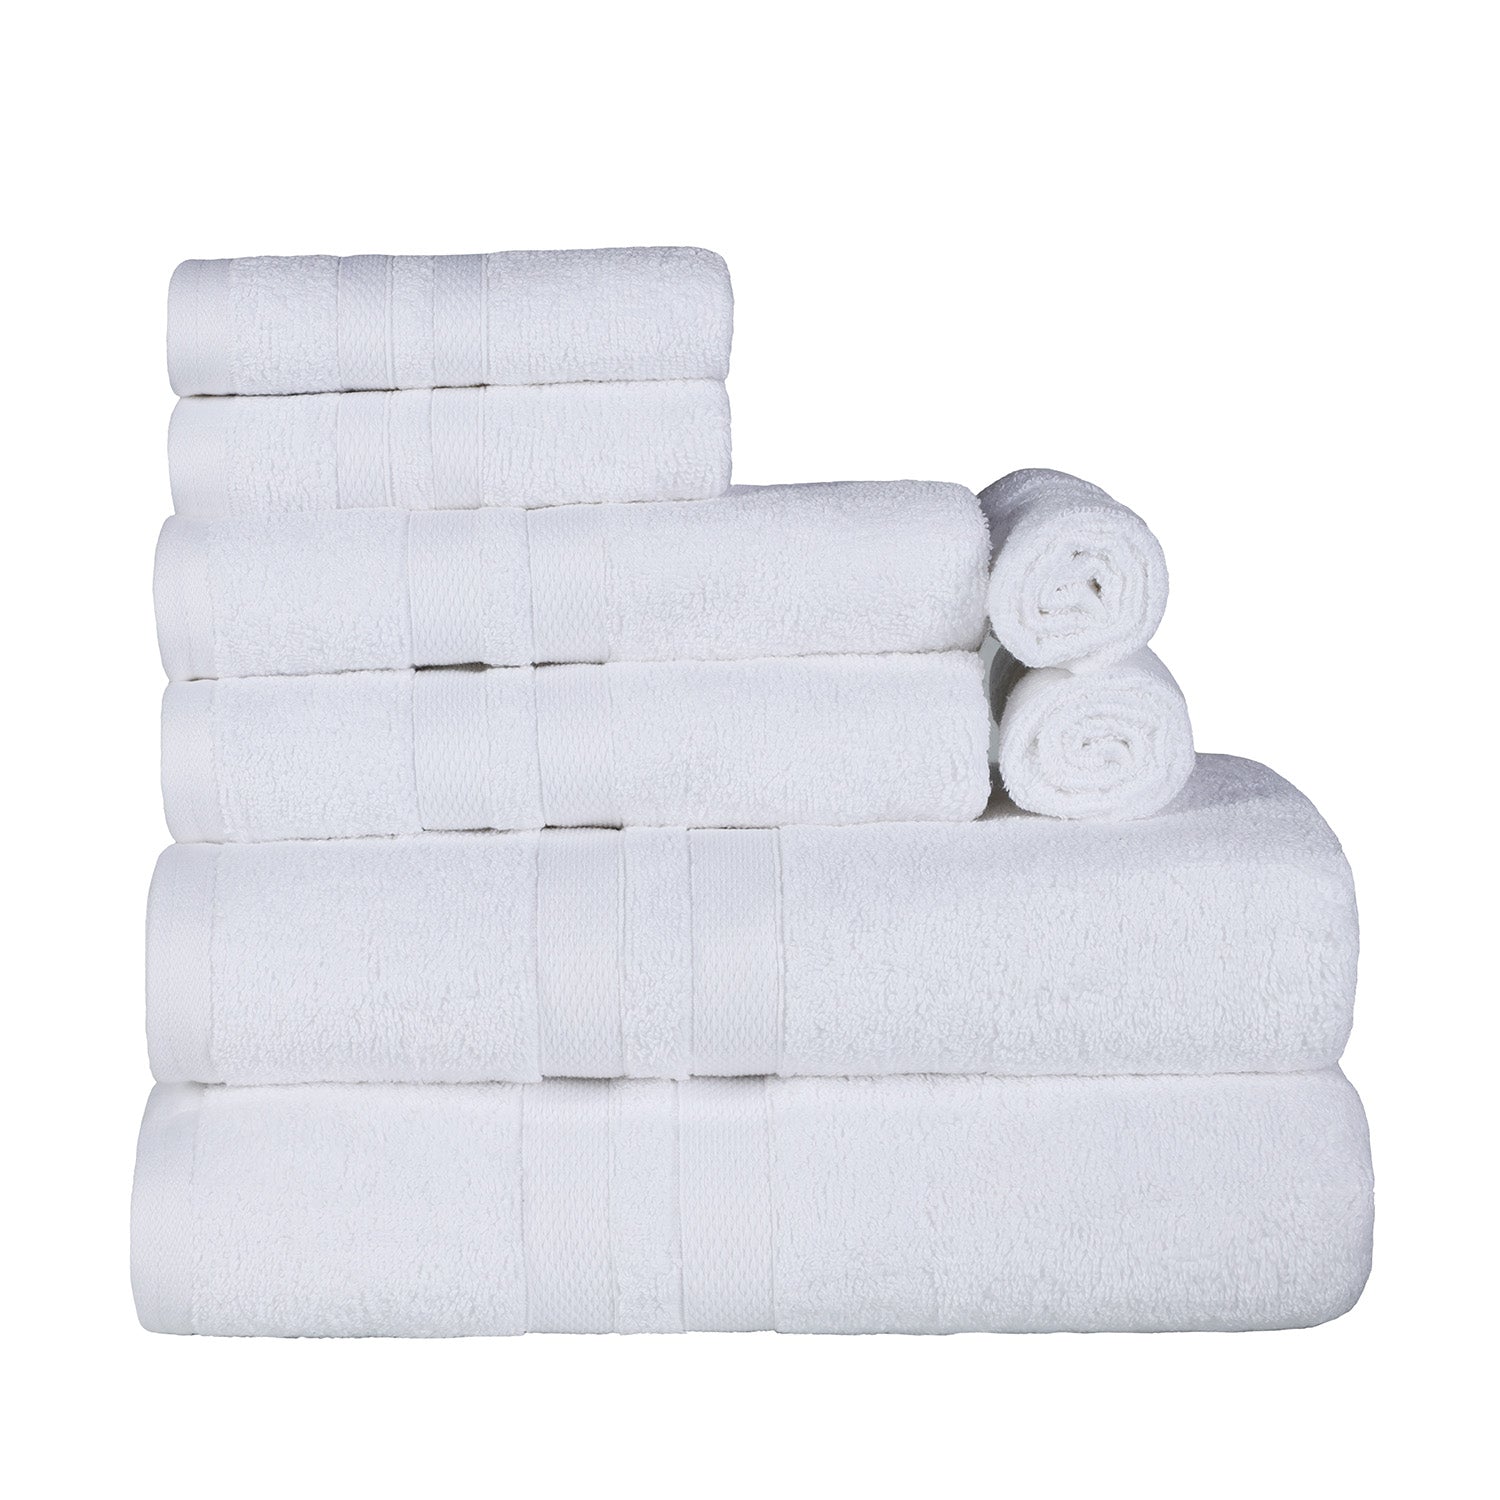 Superior Ultra Soft Cotton Absorbent Solid Assorted 8-Piece Towel Set - White